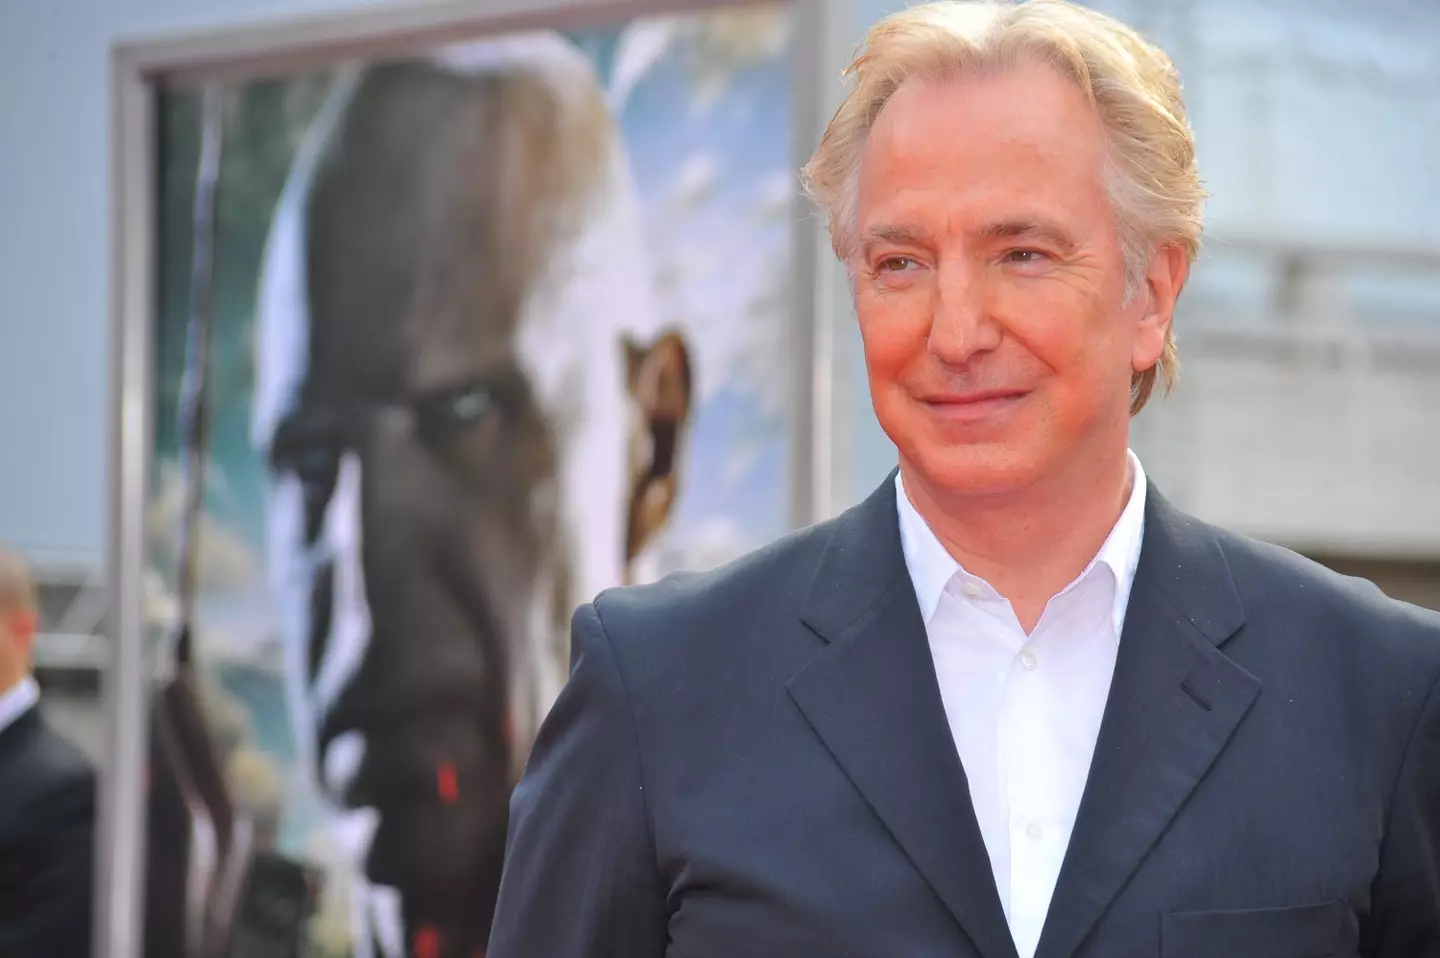 Rickman was diagnosed with cancer before production on the fifth Harry Potter film.